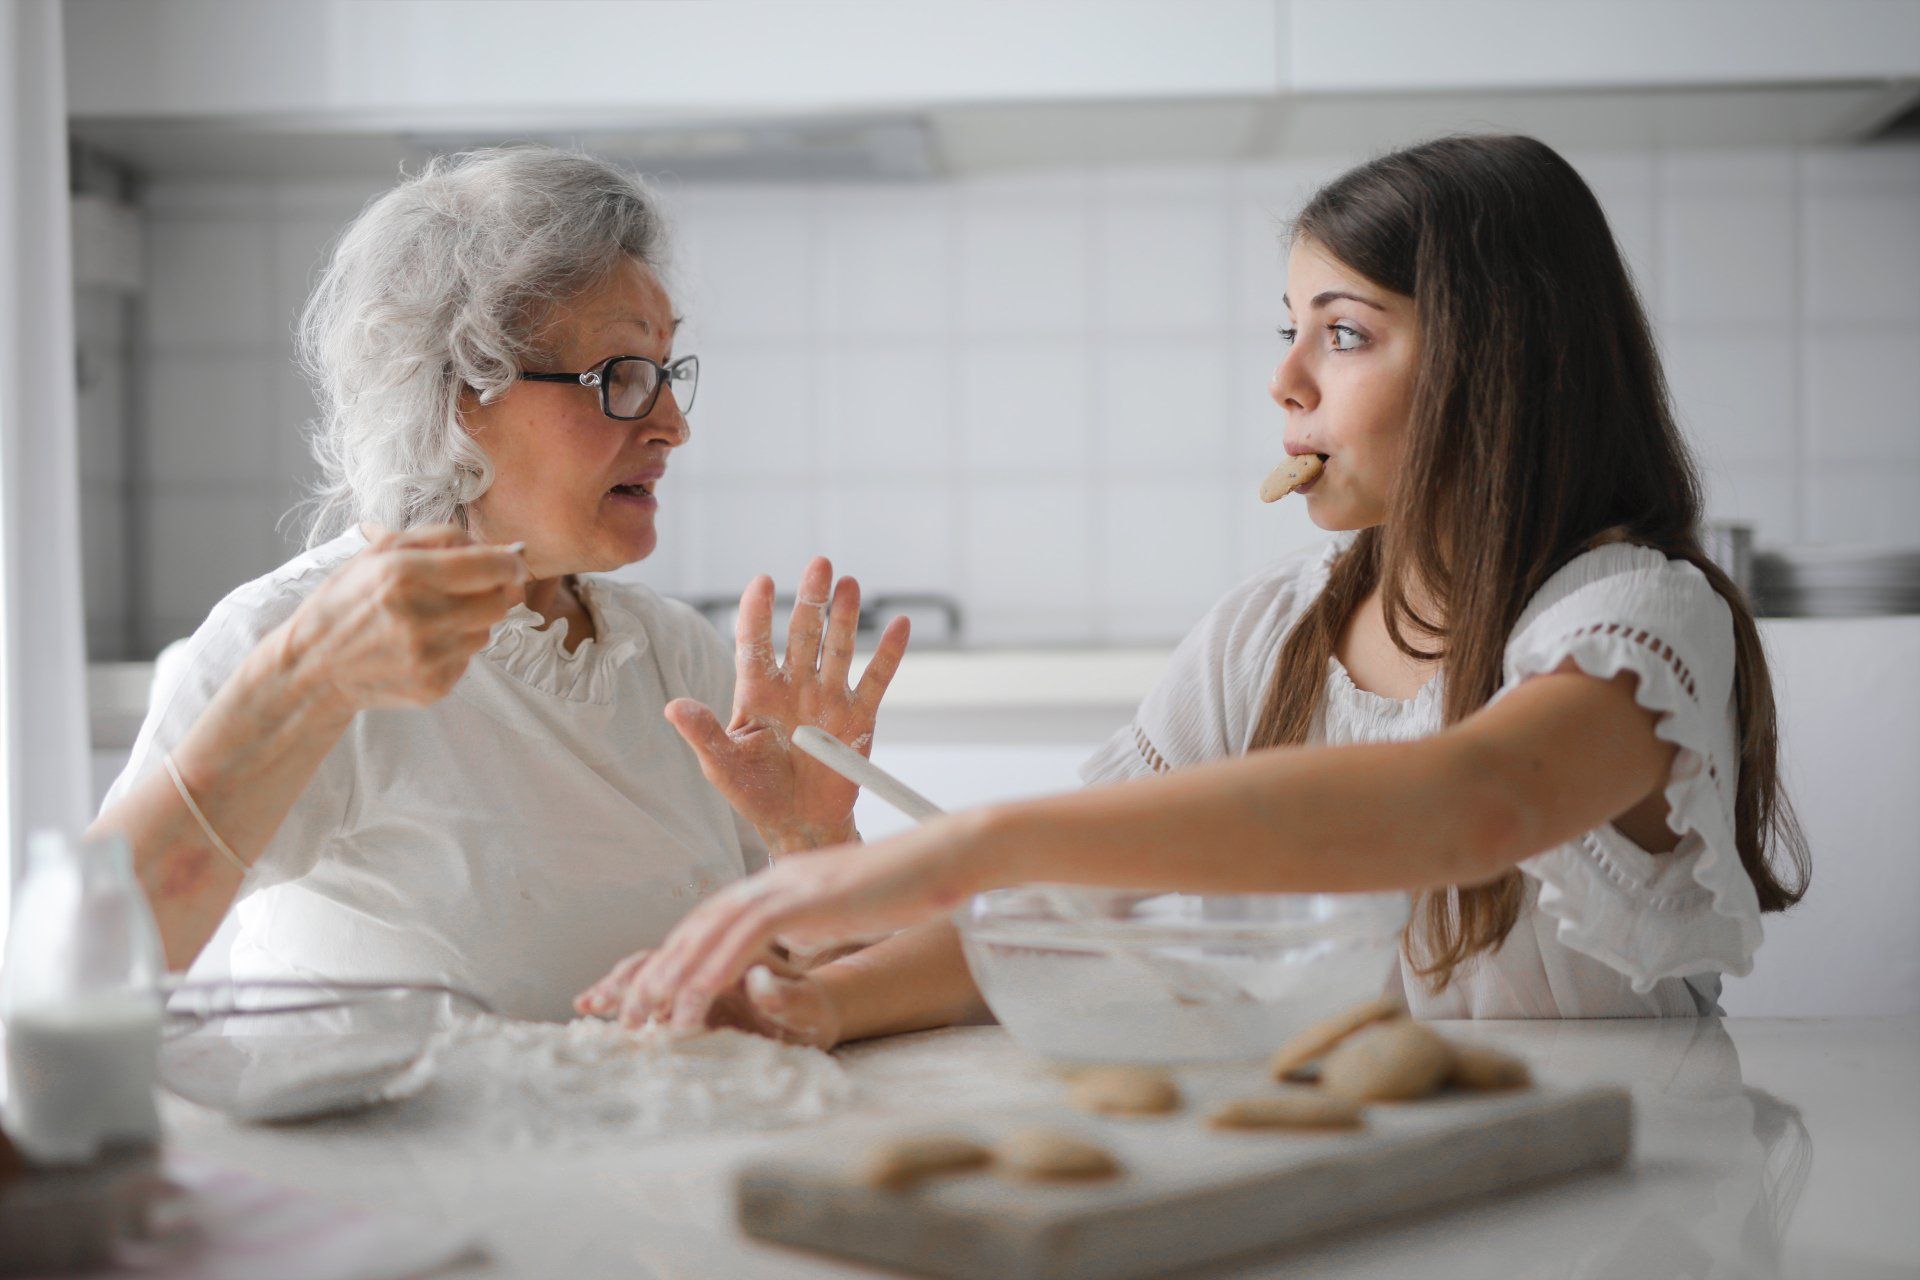 An elderly woman and a young girl are sitting at a table eating cookies.